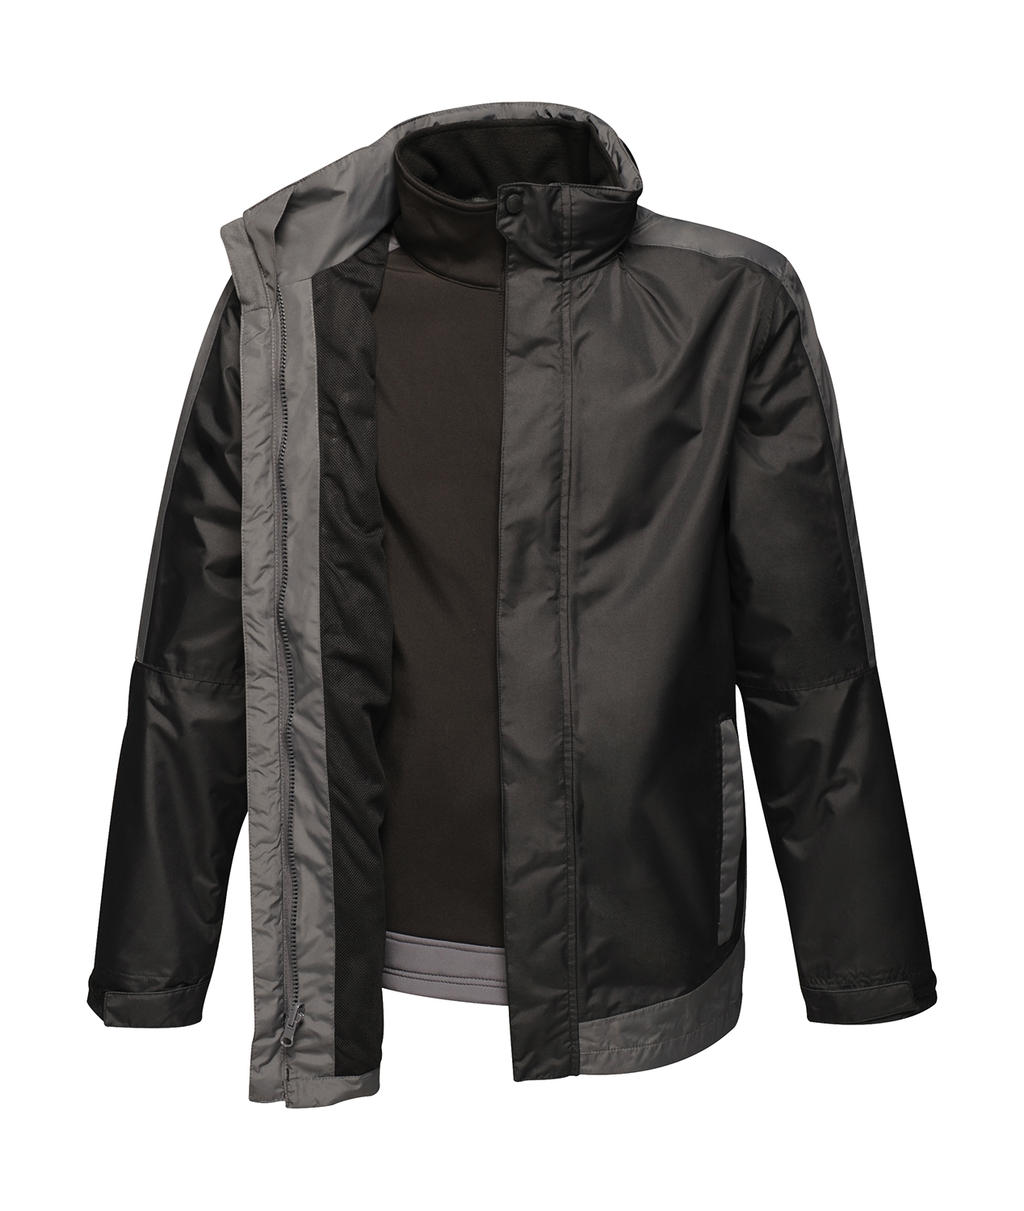 Contrast Softshell 3-in-1 Jacket